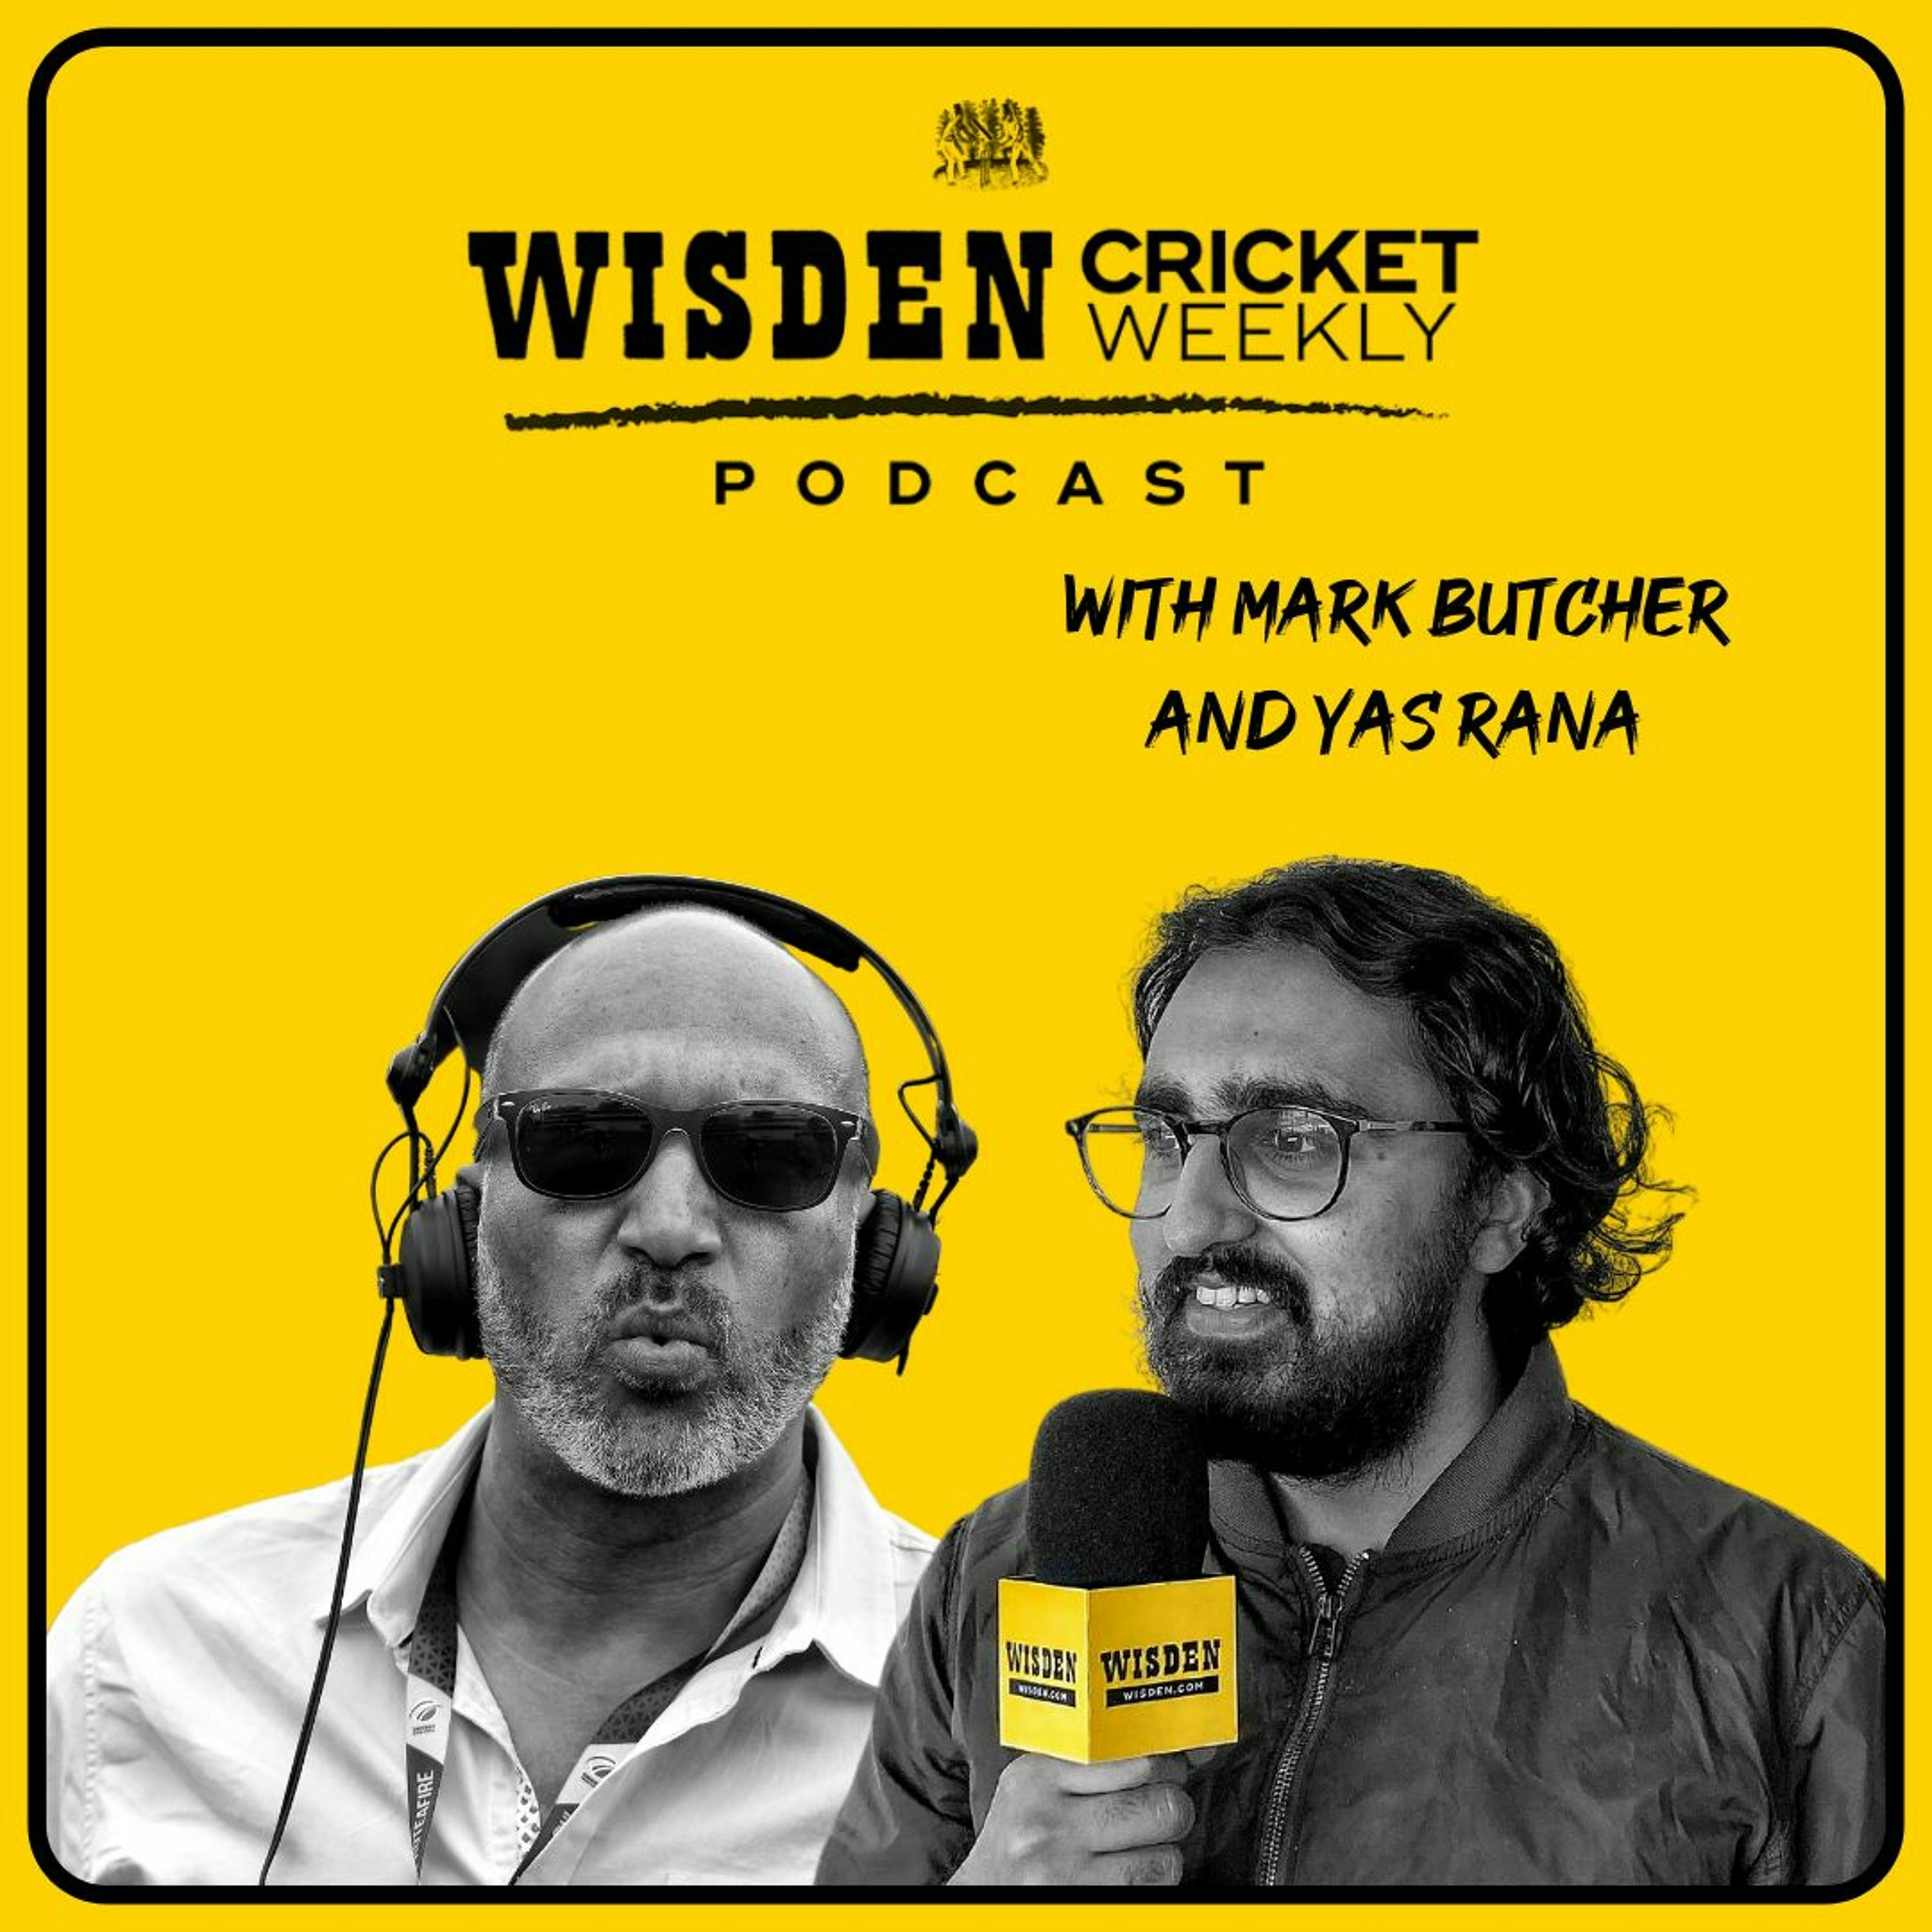 Parkinson's on fire, the IPL's postponed and Gooch on the art of batting